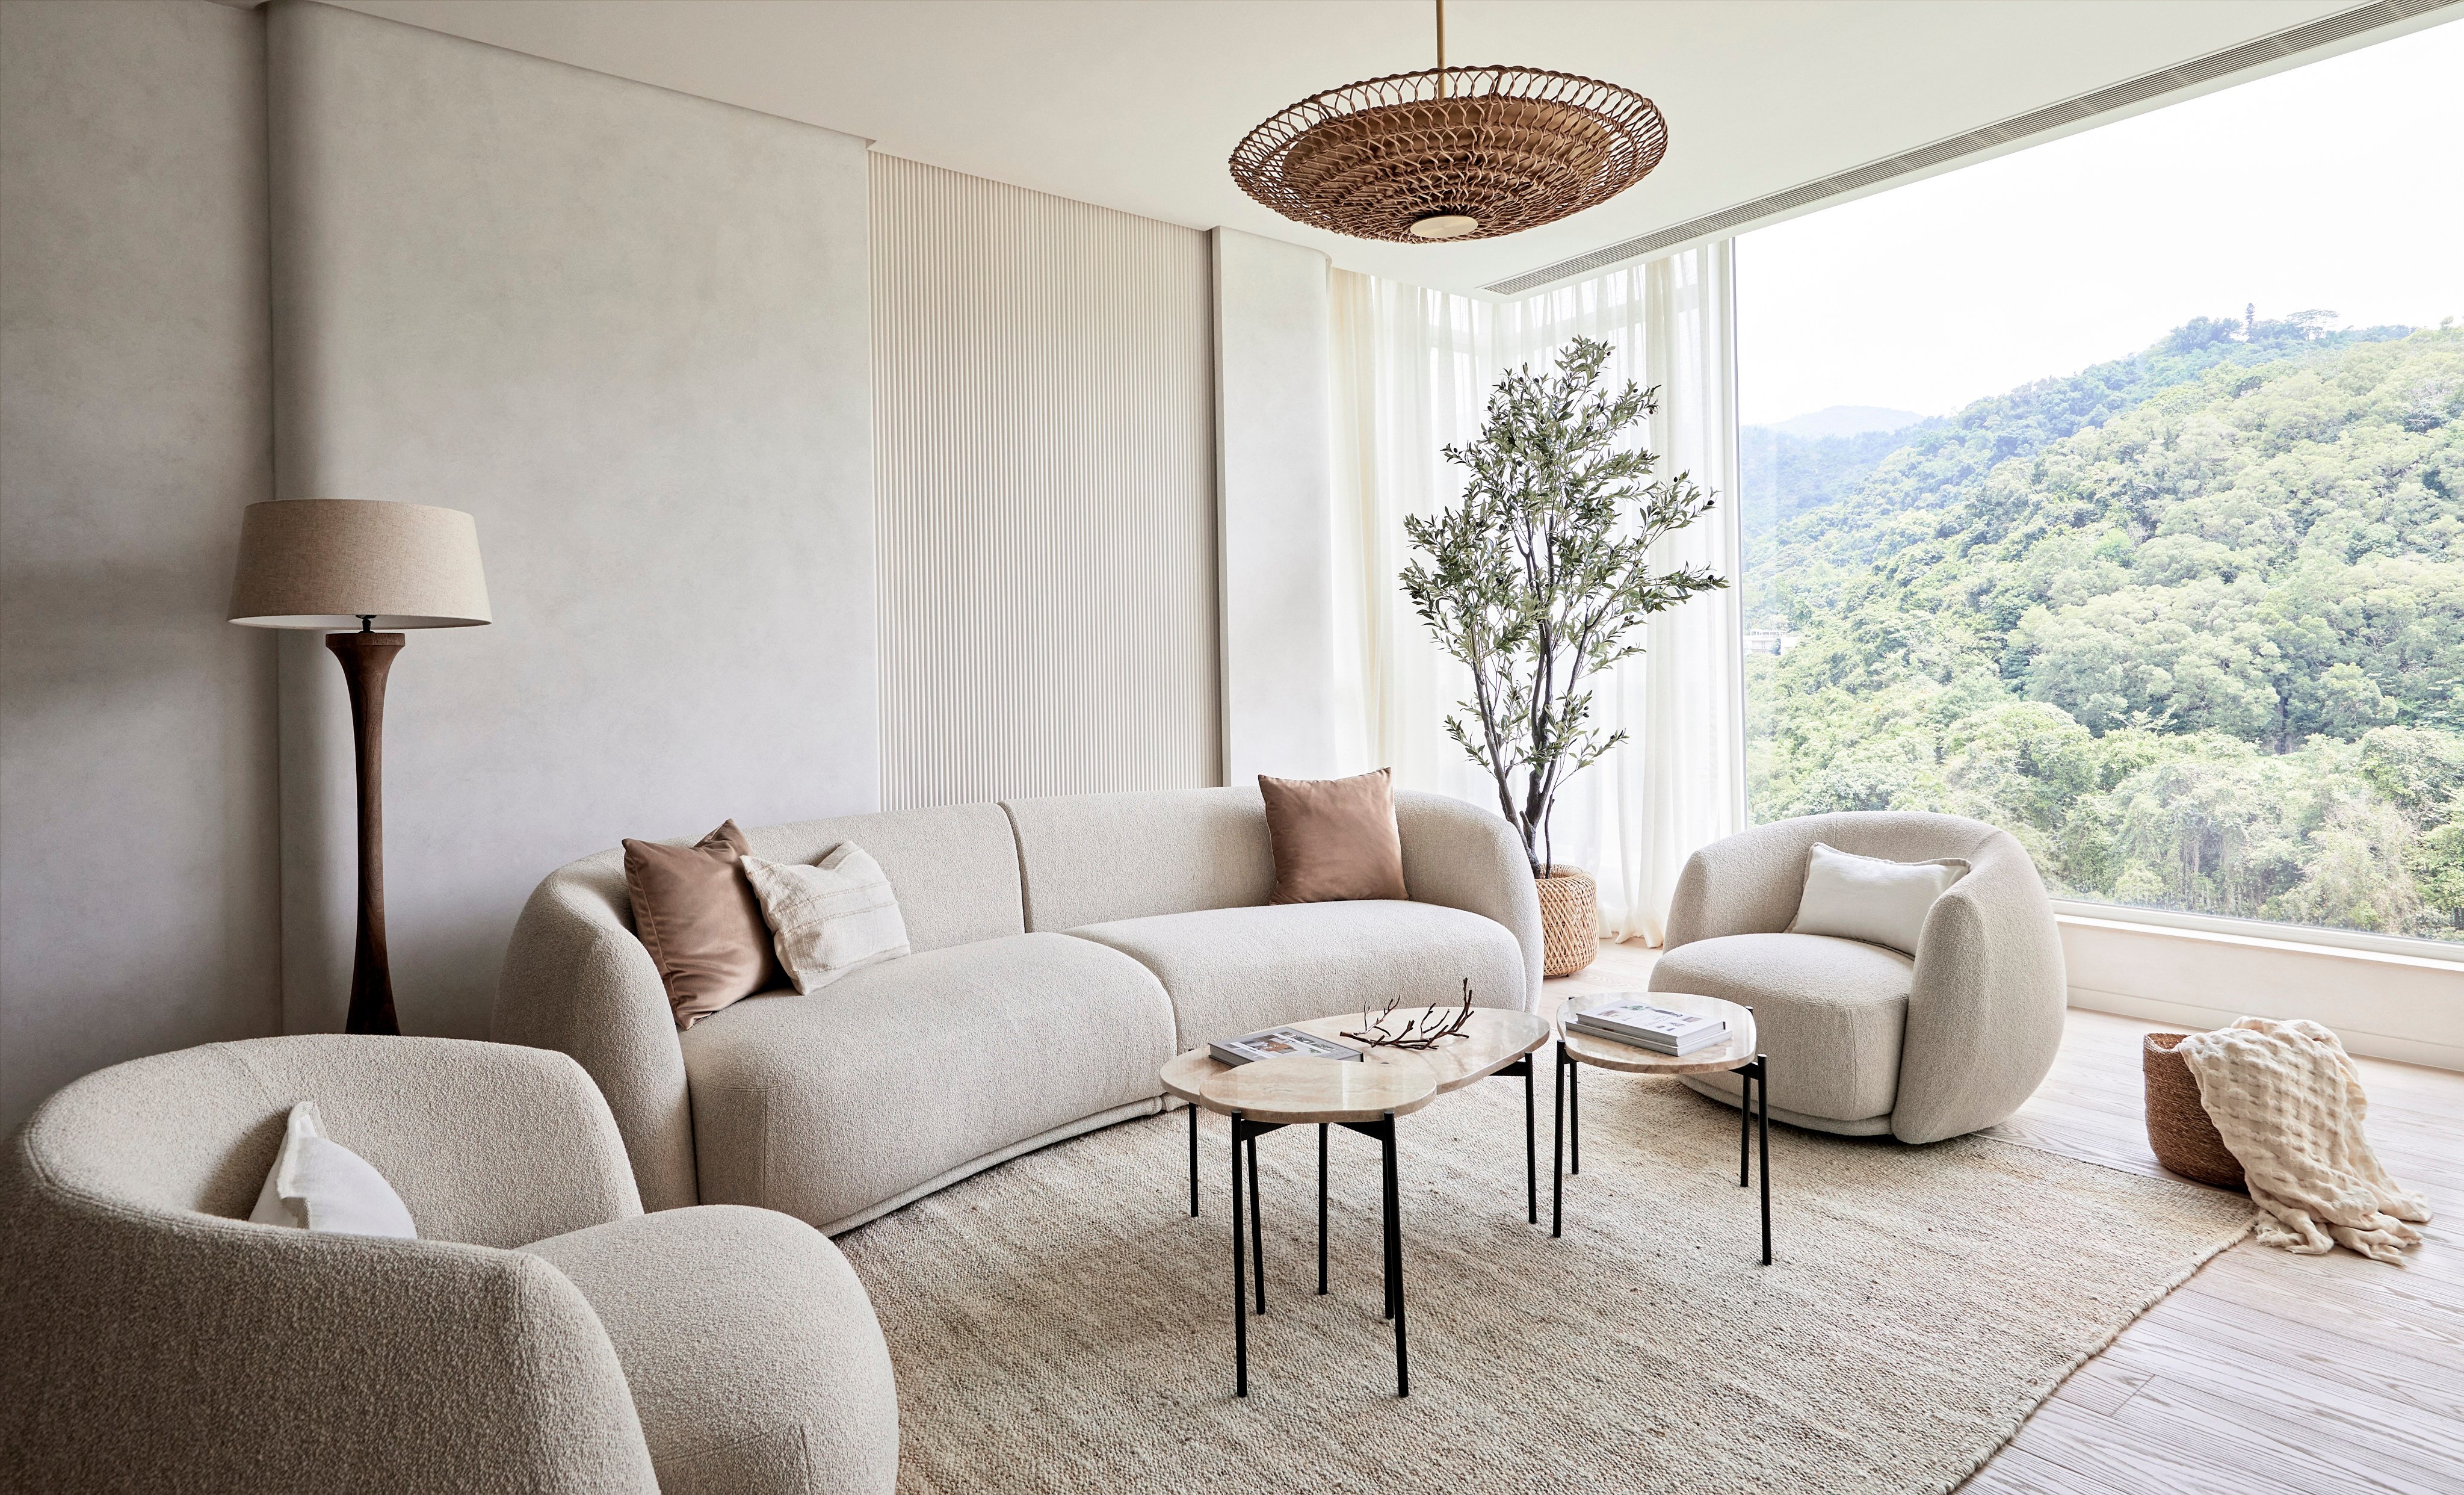 The living room of a home in Sha Tin, Hong Kong, designed by Liquid Interiors. The flat has been renovated for the second time in a decade, transitioning from a child-friendly home to a grown-up space. Photo: Simon J Nicol